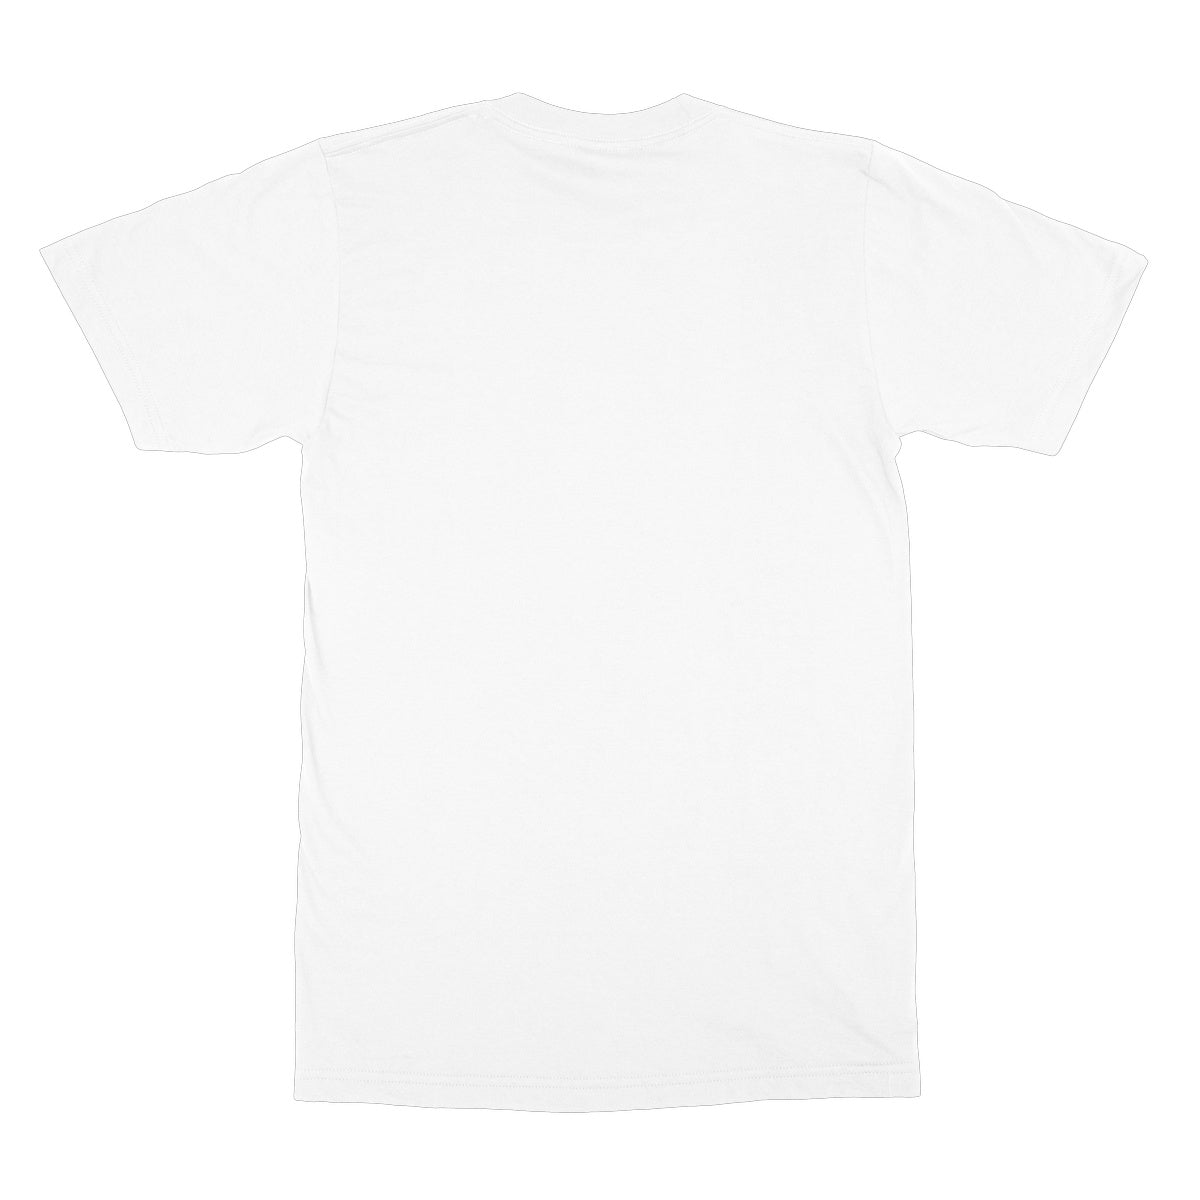 Complex Squaring Softstyle T-Shirt